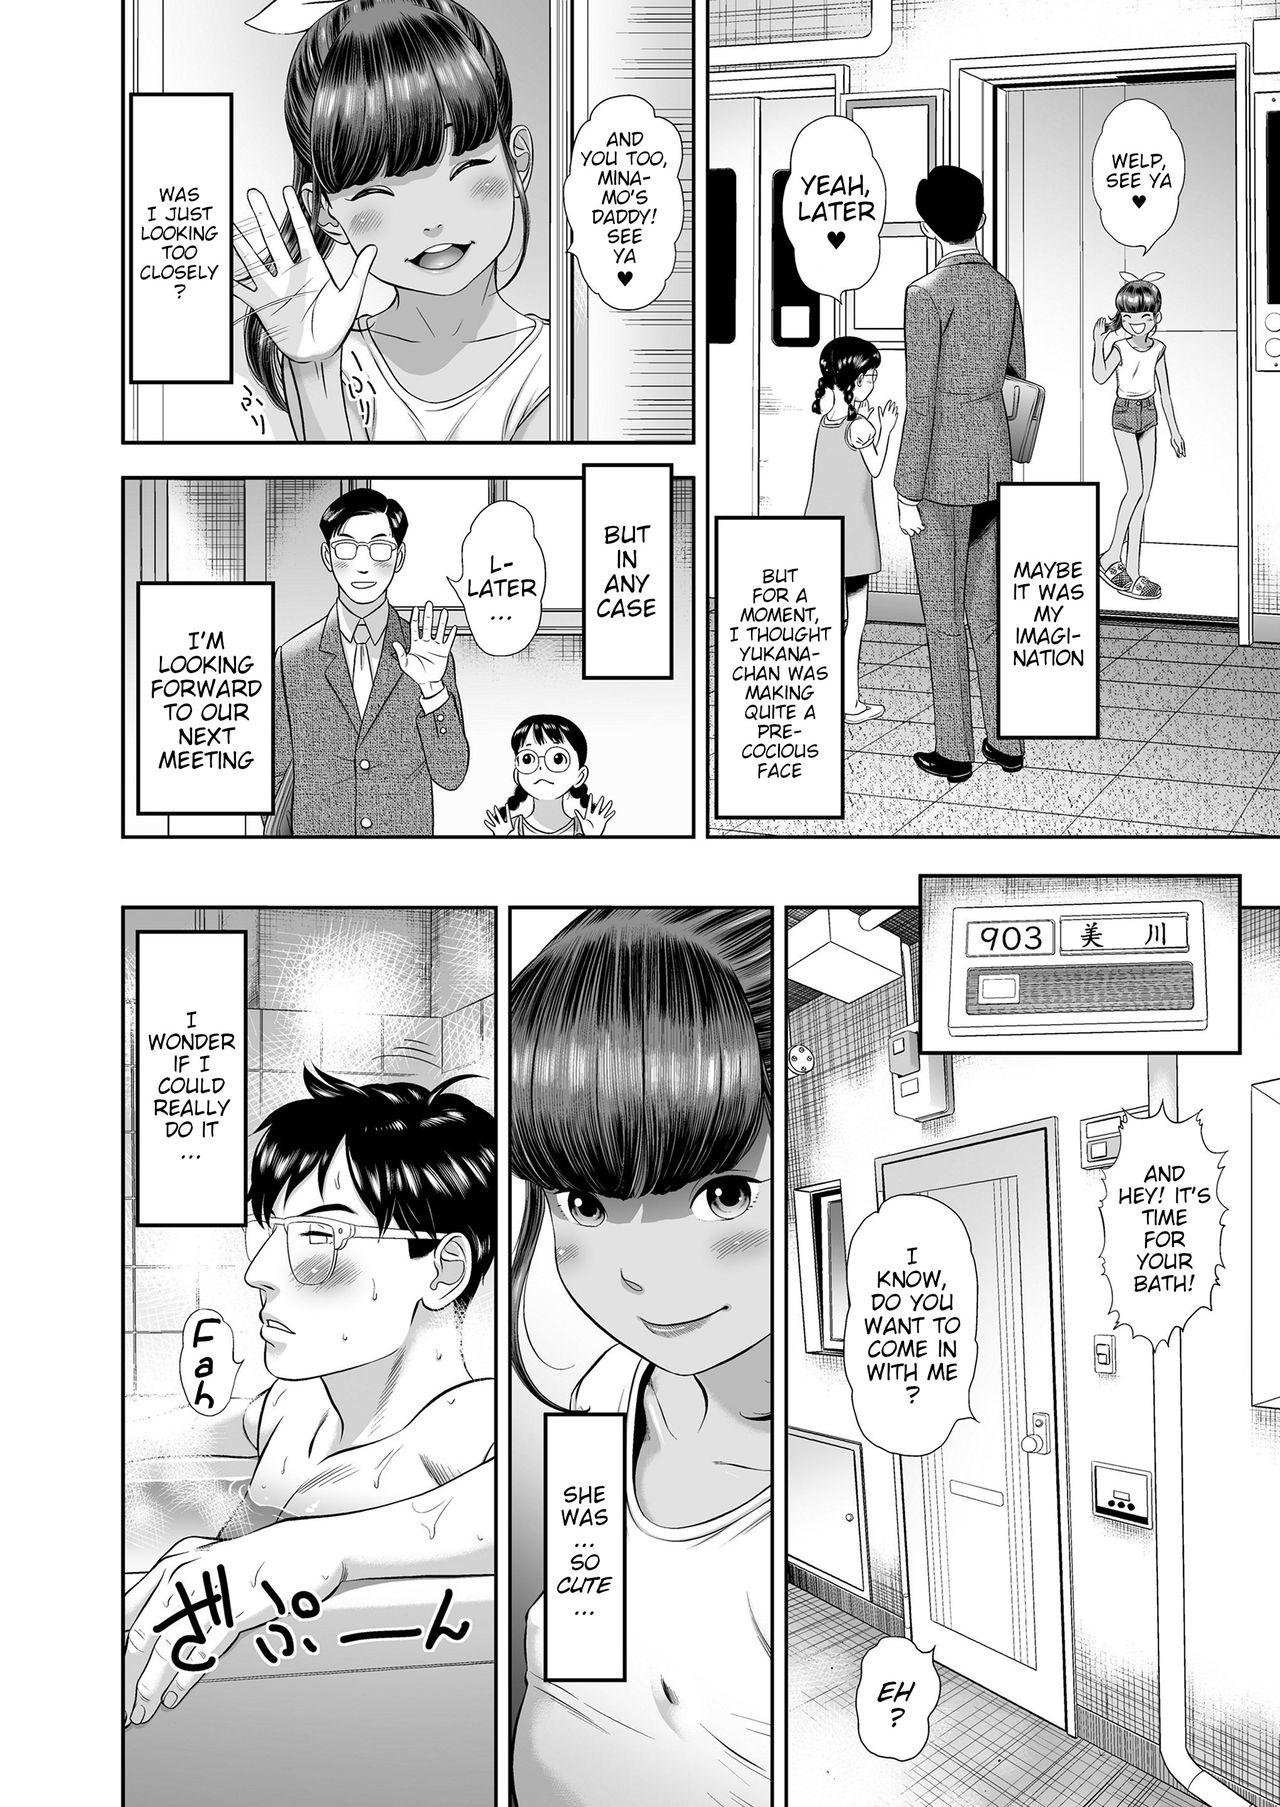 Anal Creampie Danchi shoujo | Wonderful Environment Family Roleplay - Page 4